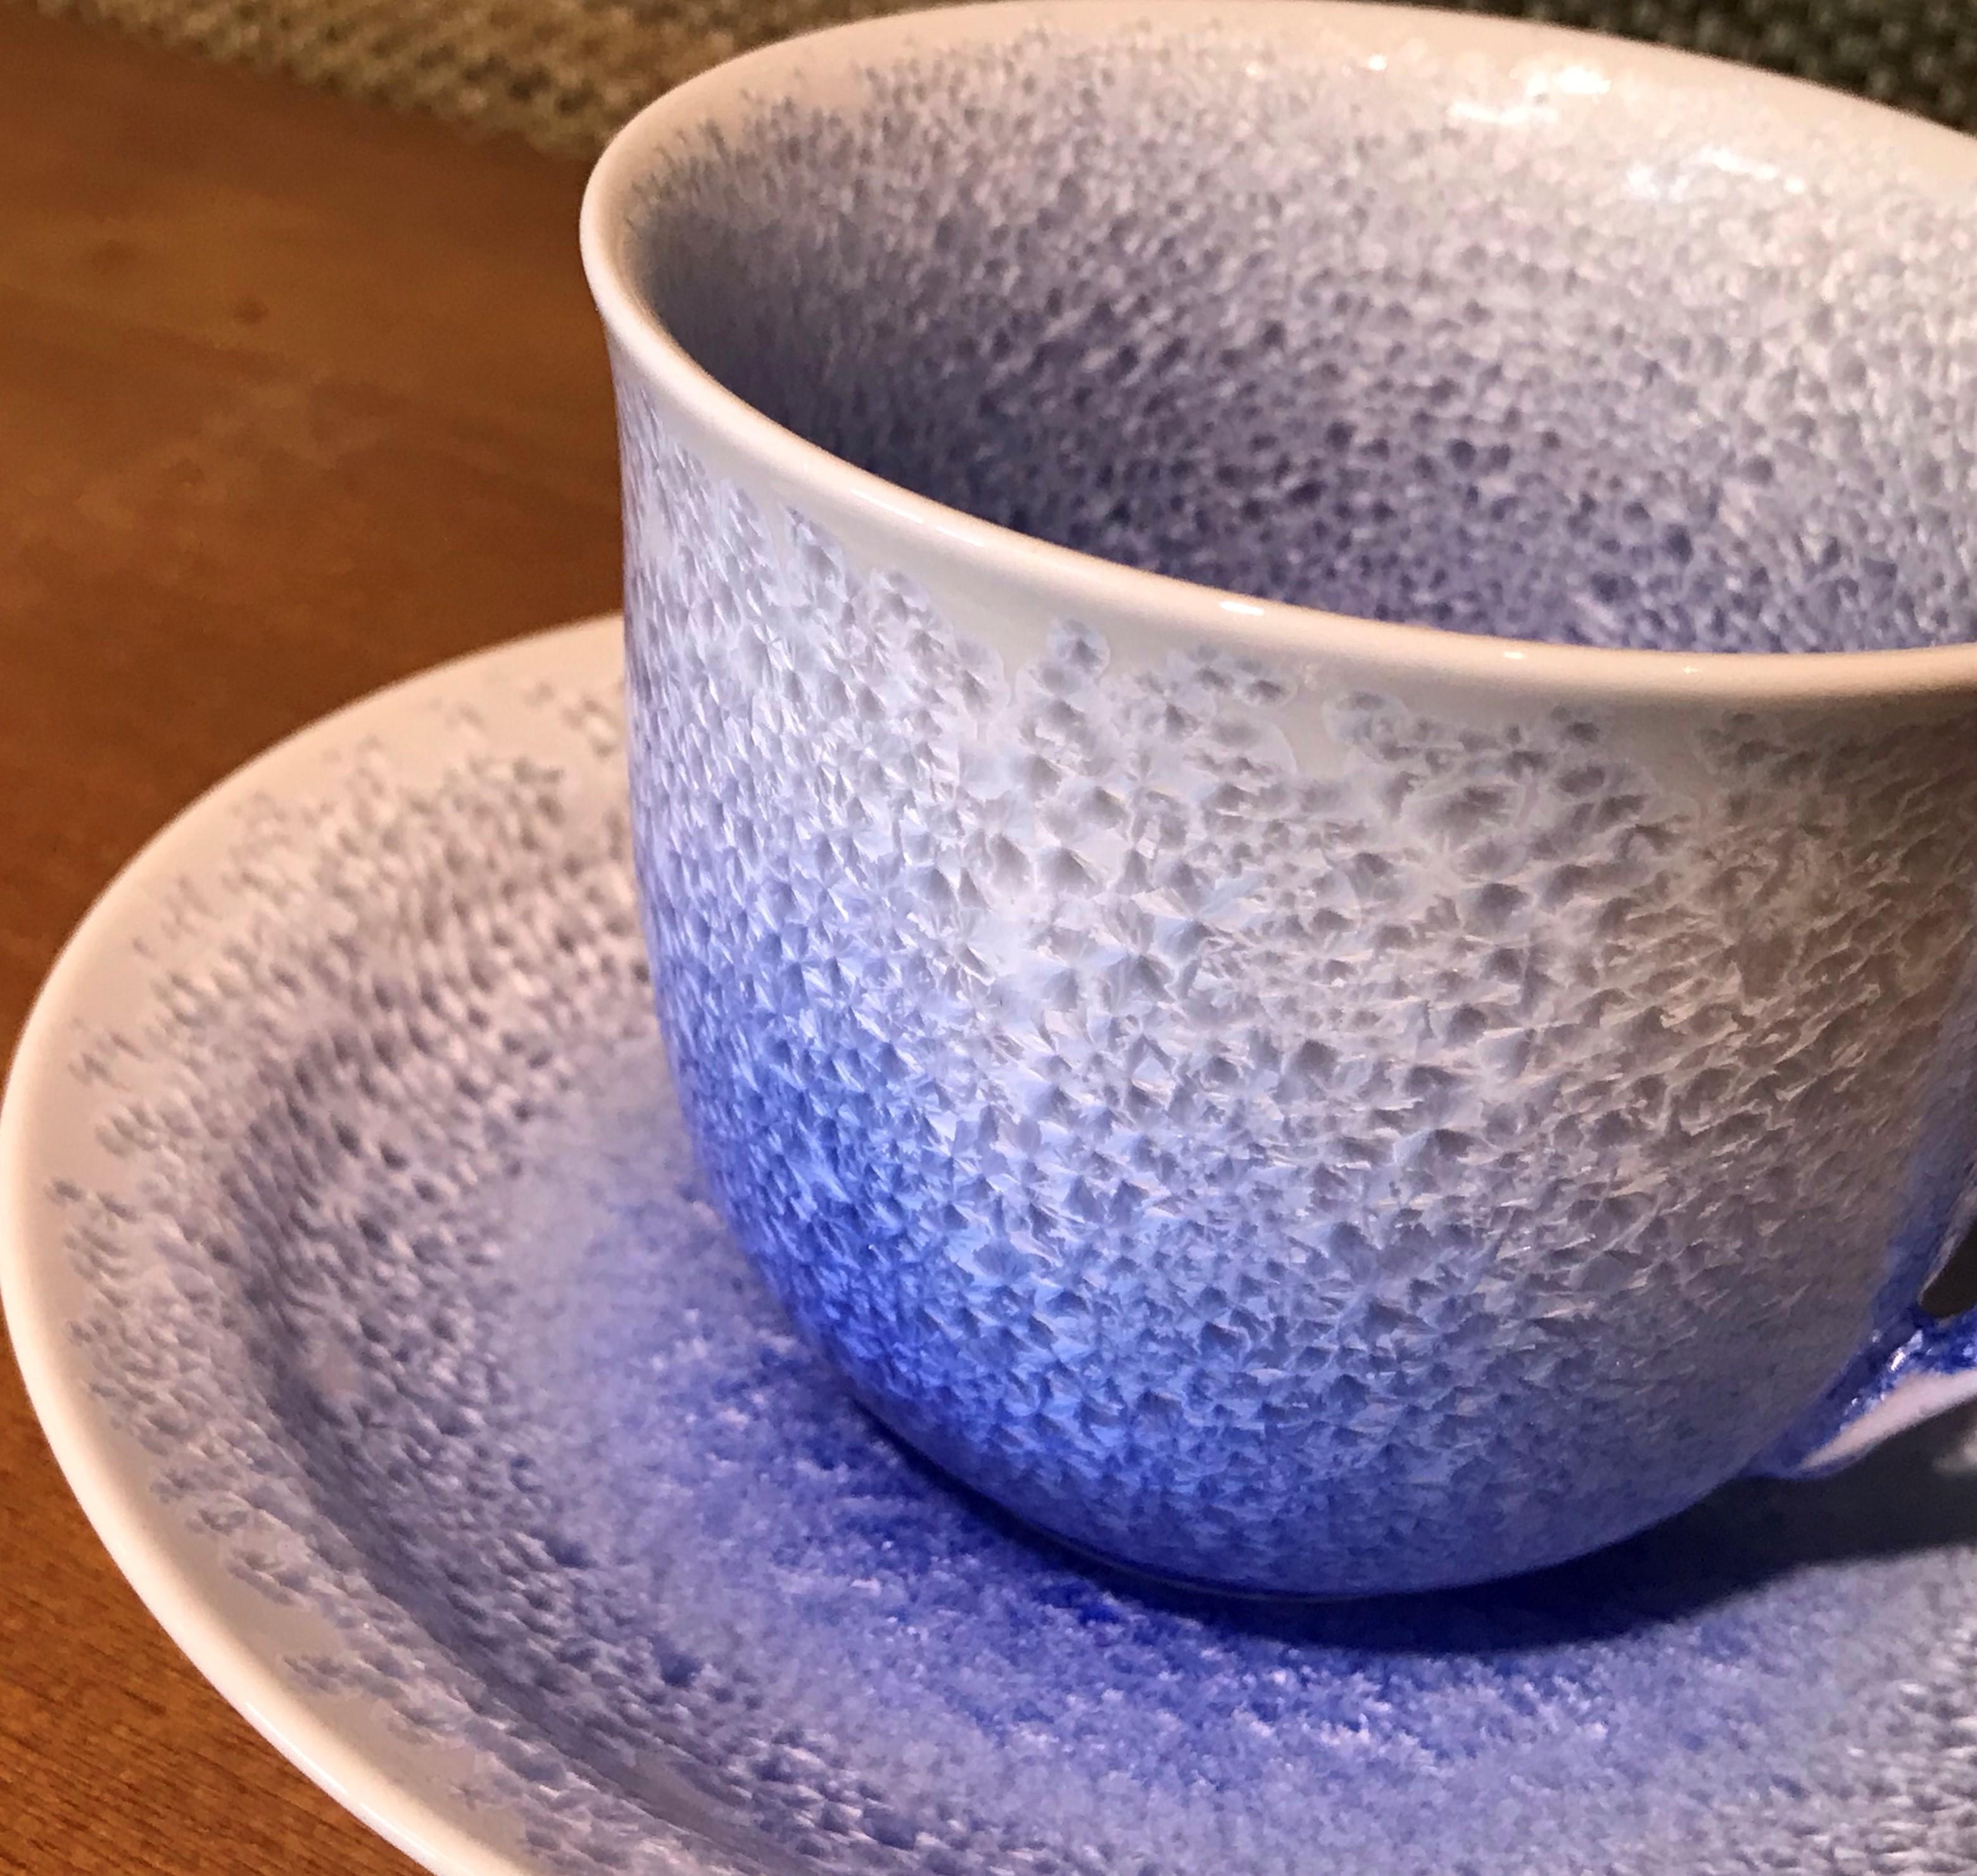 Hand-Painted Japanese Hand-Glazed Blue White Porcelain Cup and Saucer by Master Artist